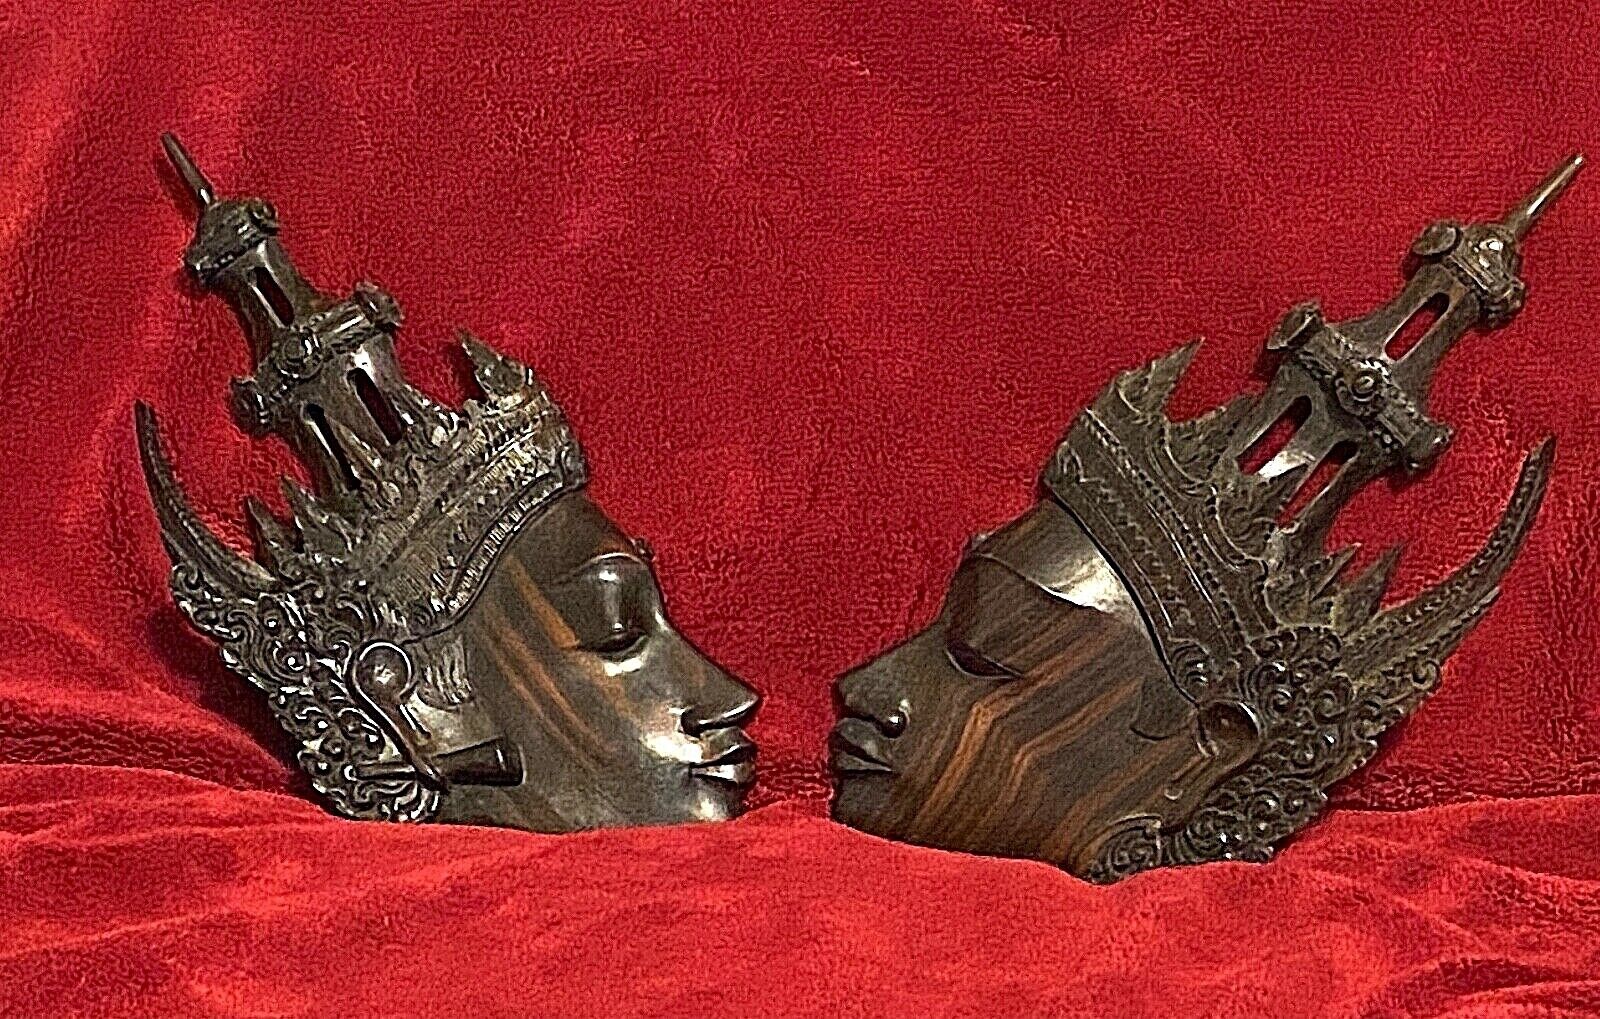 Lustrous Pair of Indonesian Head Carvings. Special Two-for-One Pricing. Vintage